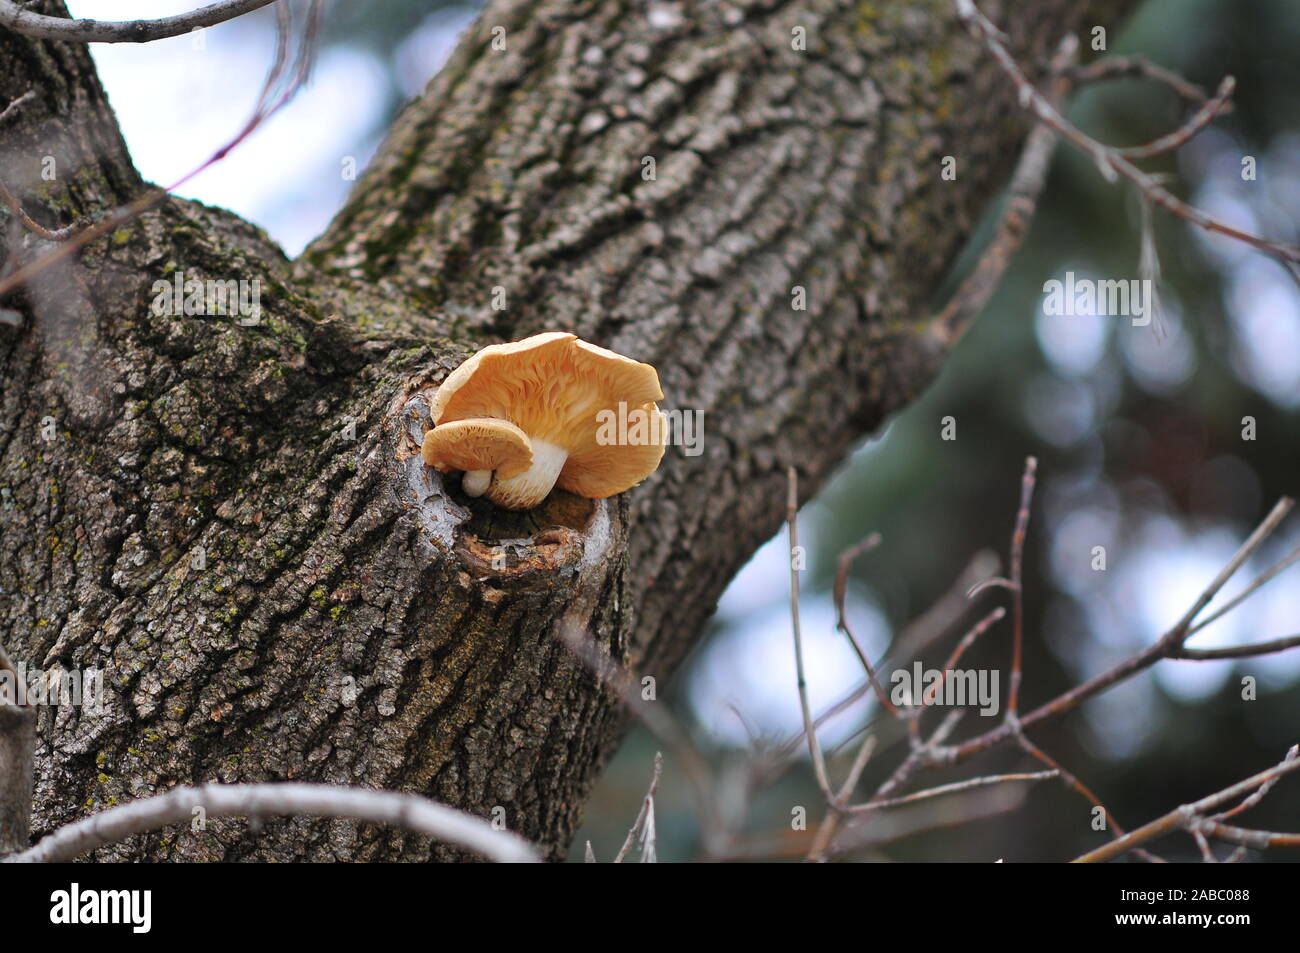 Two late season white mushroom (Agrocybe cylindracea) growing high up a tree trunk from a branch stump. Ottawa, Ontario, Canada. Stock Photo